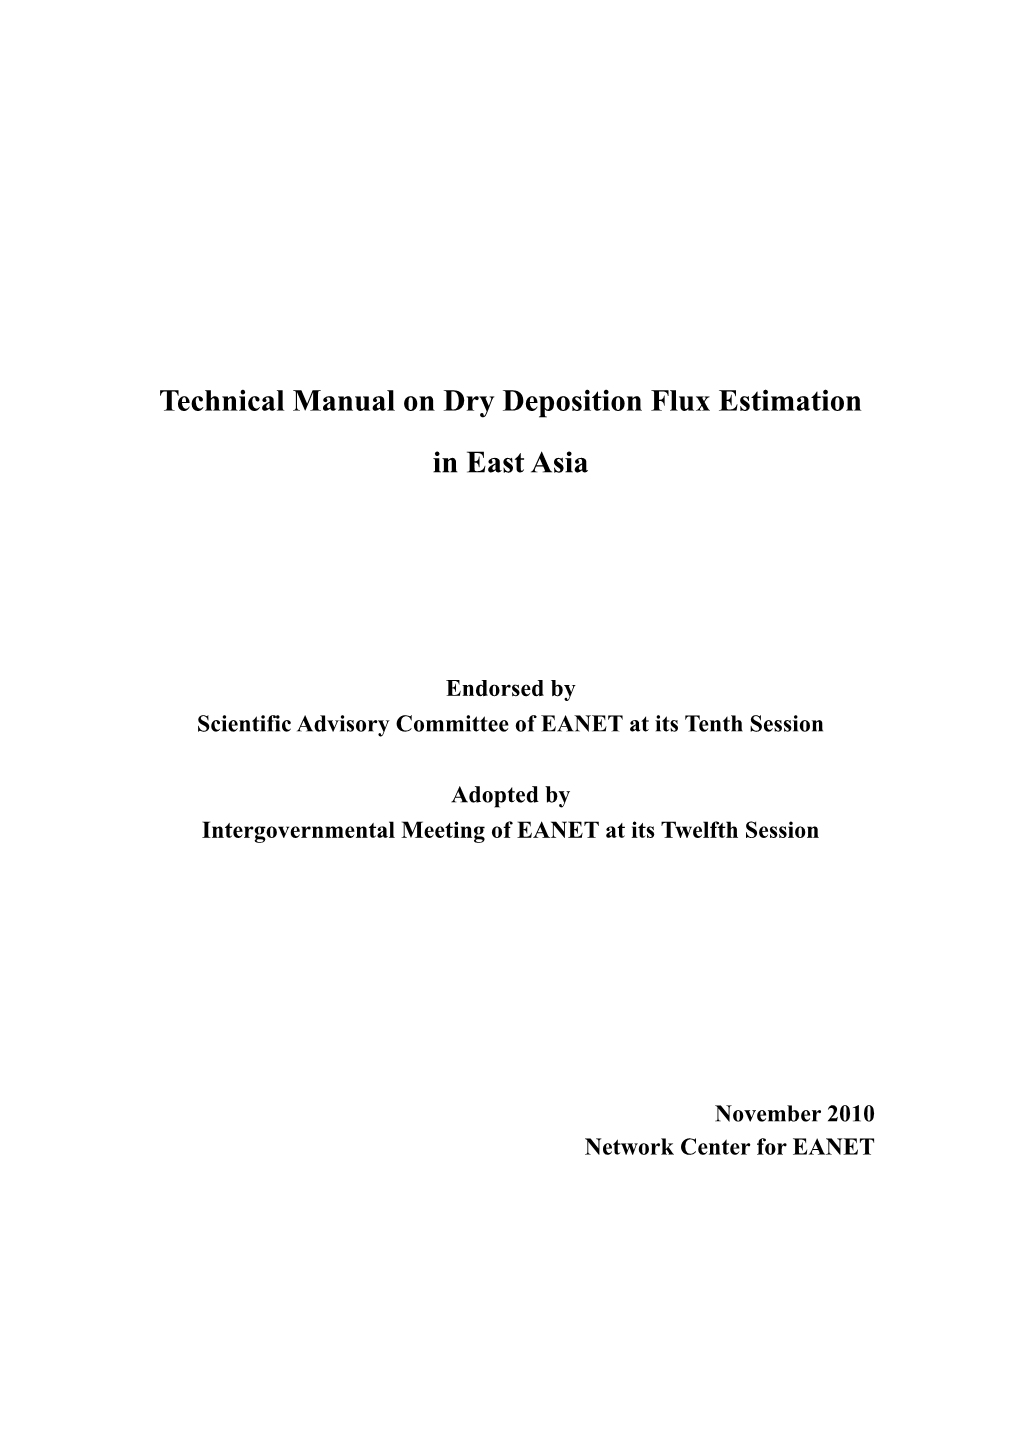 Technical Manual on Dry Deposition Flux Estimation in East Asia